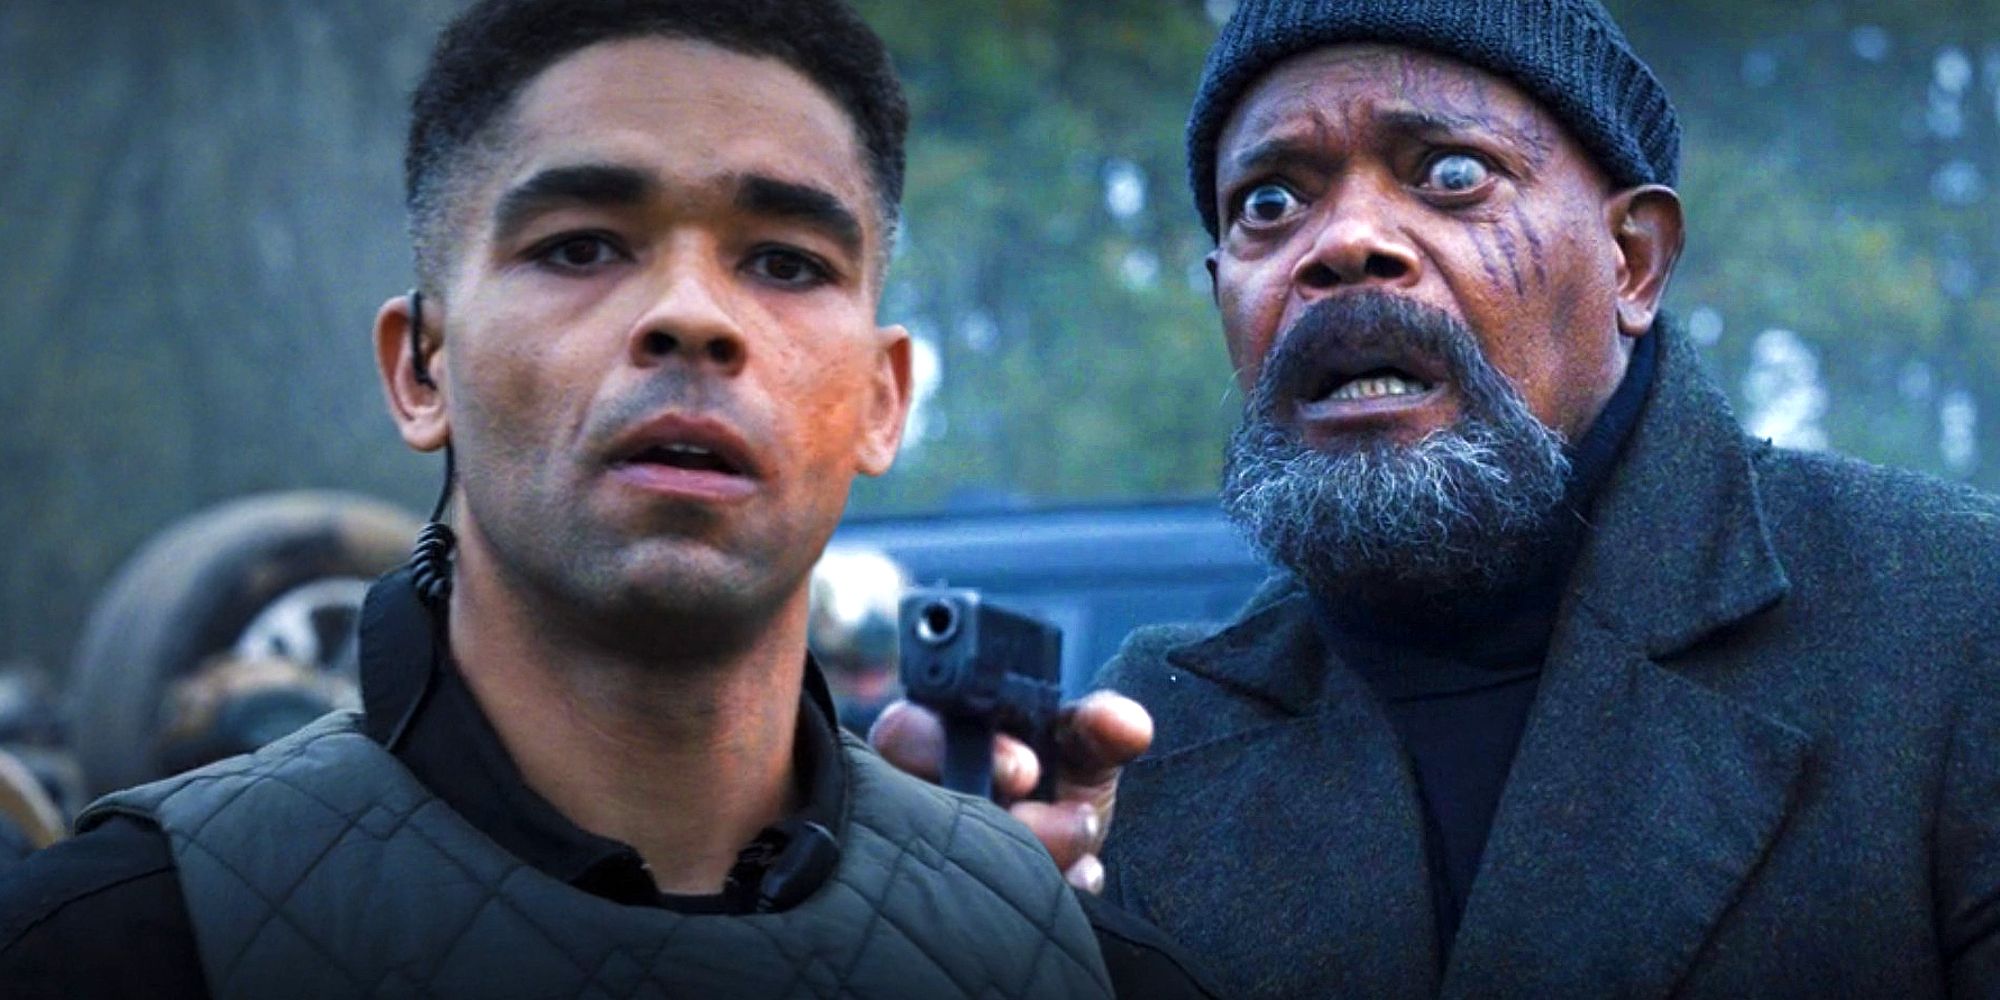 REVIEW: Nick Fury is Finally Back in Episode 5 of 'Secret Invasion